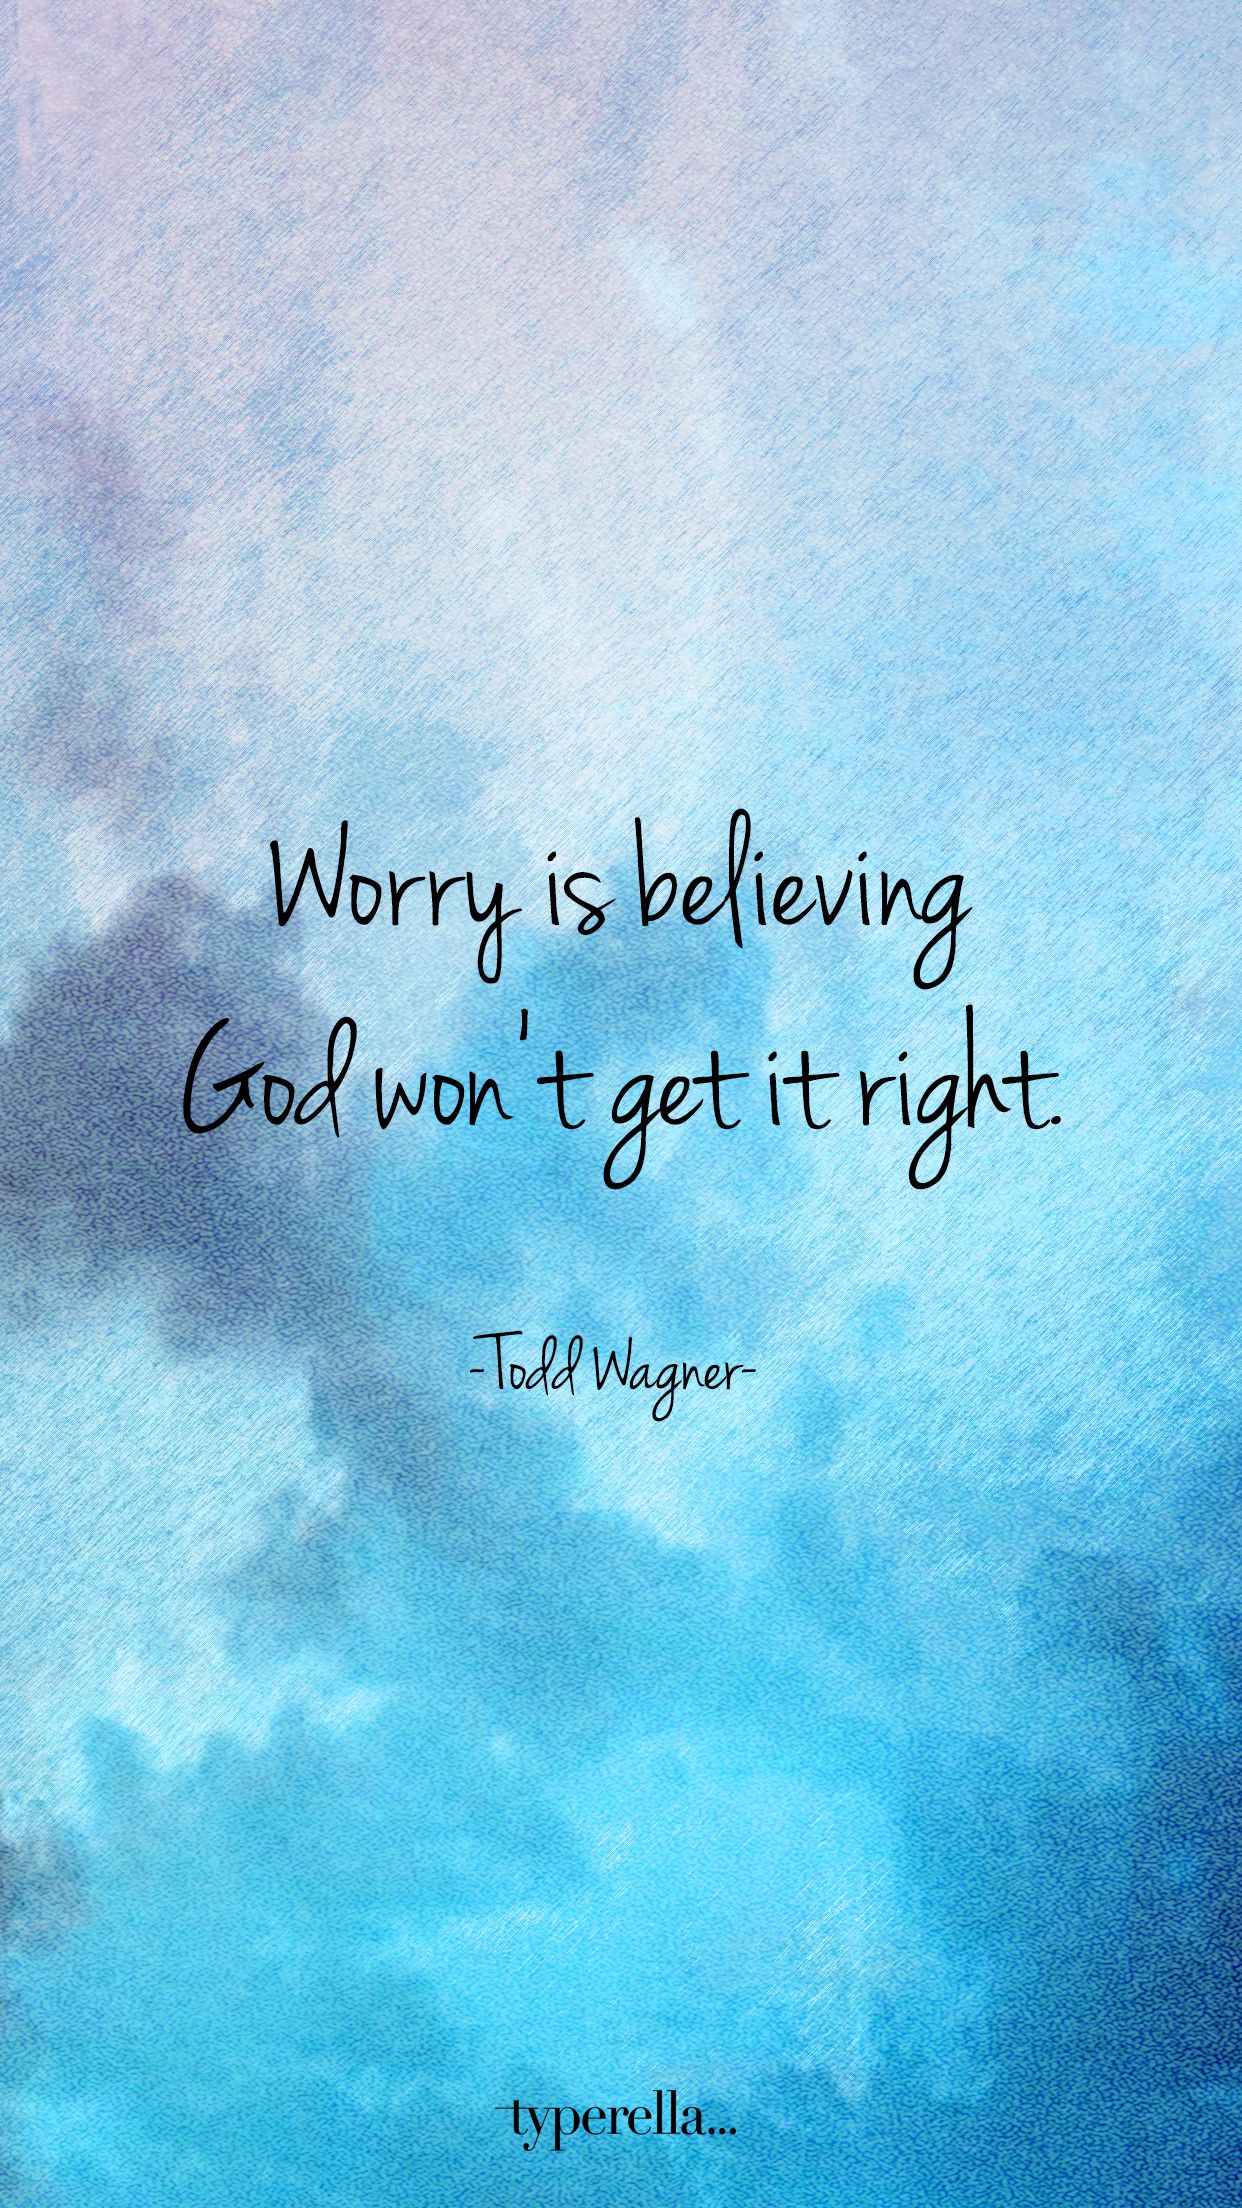 worry is believing god wont get it right. todd wagner